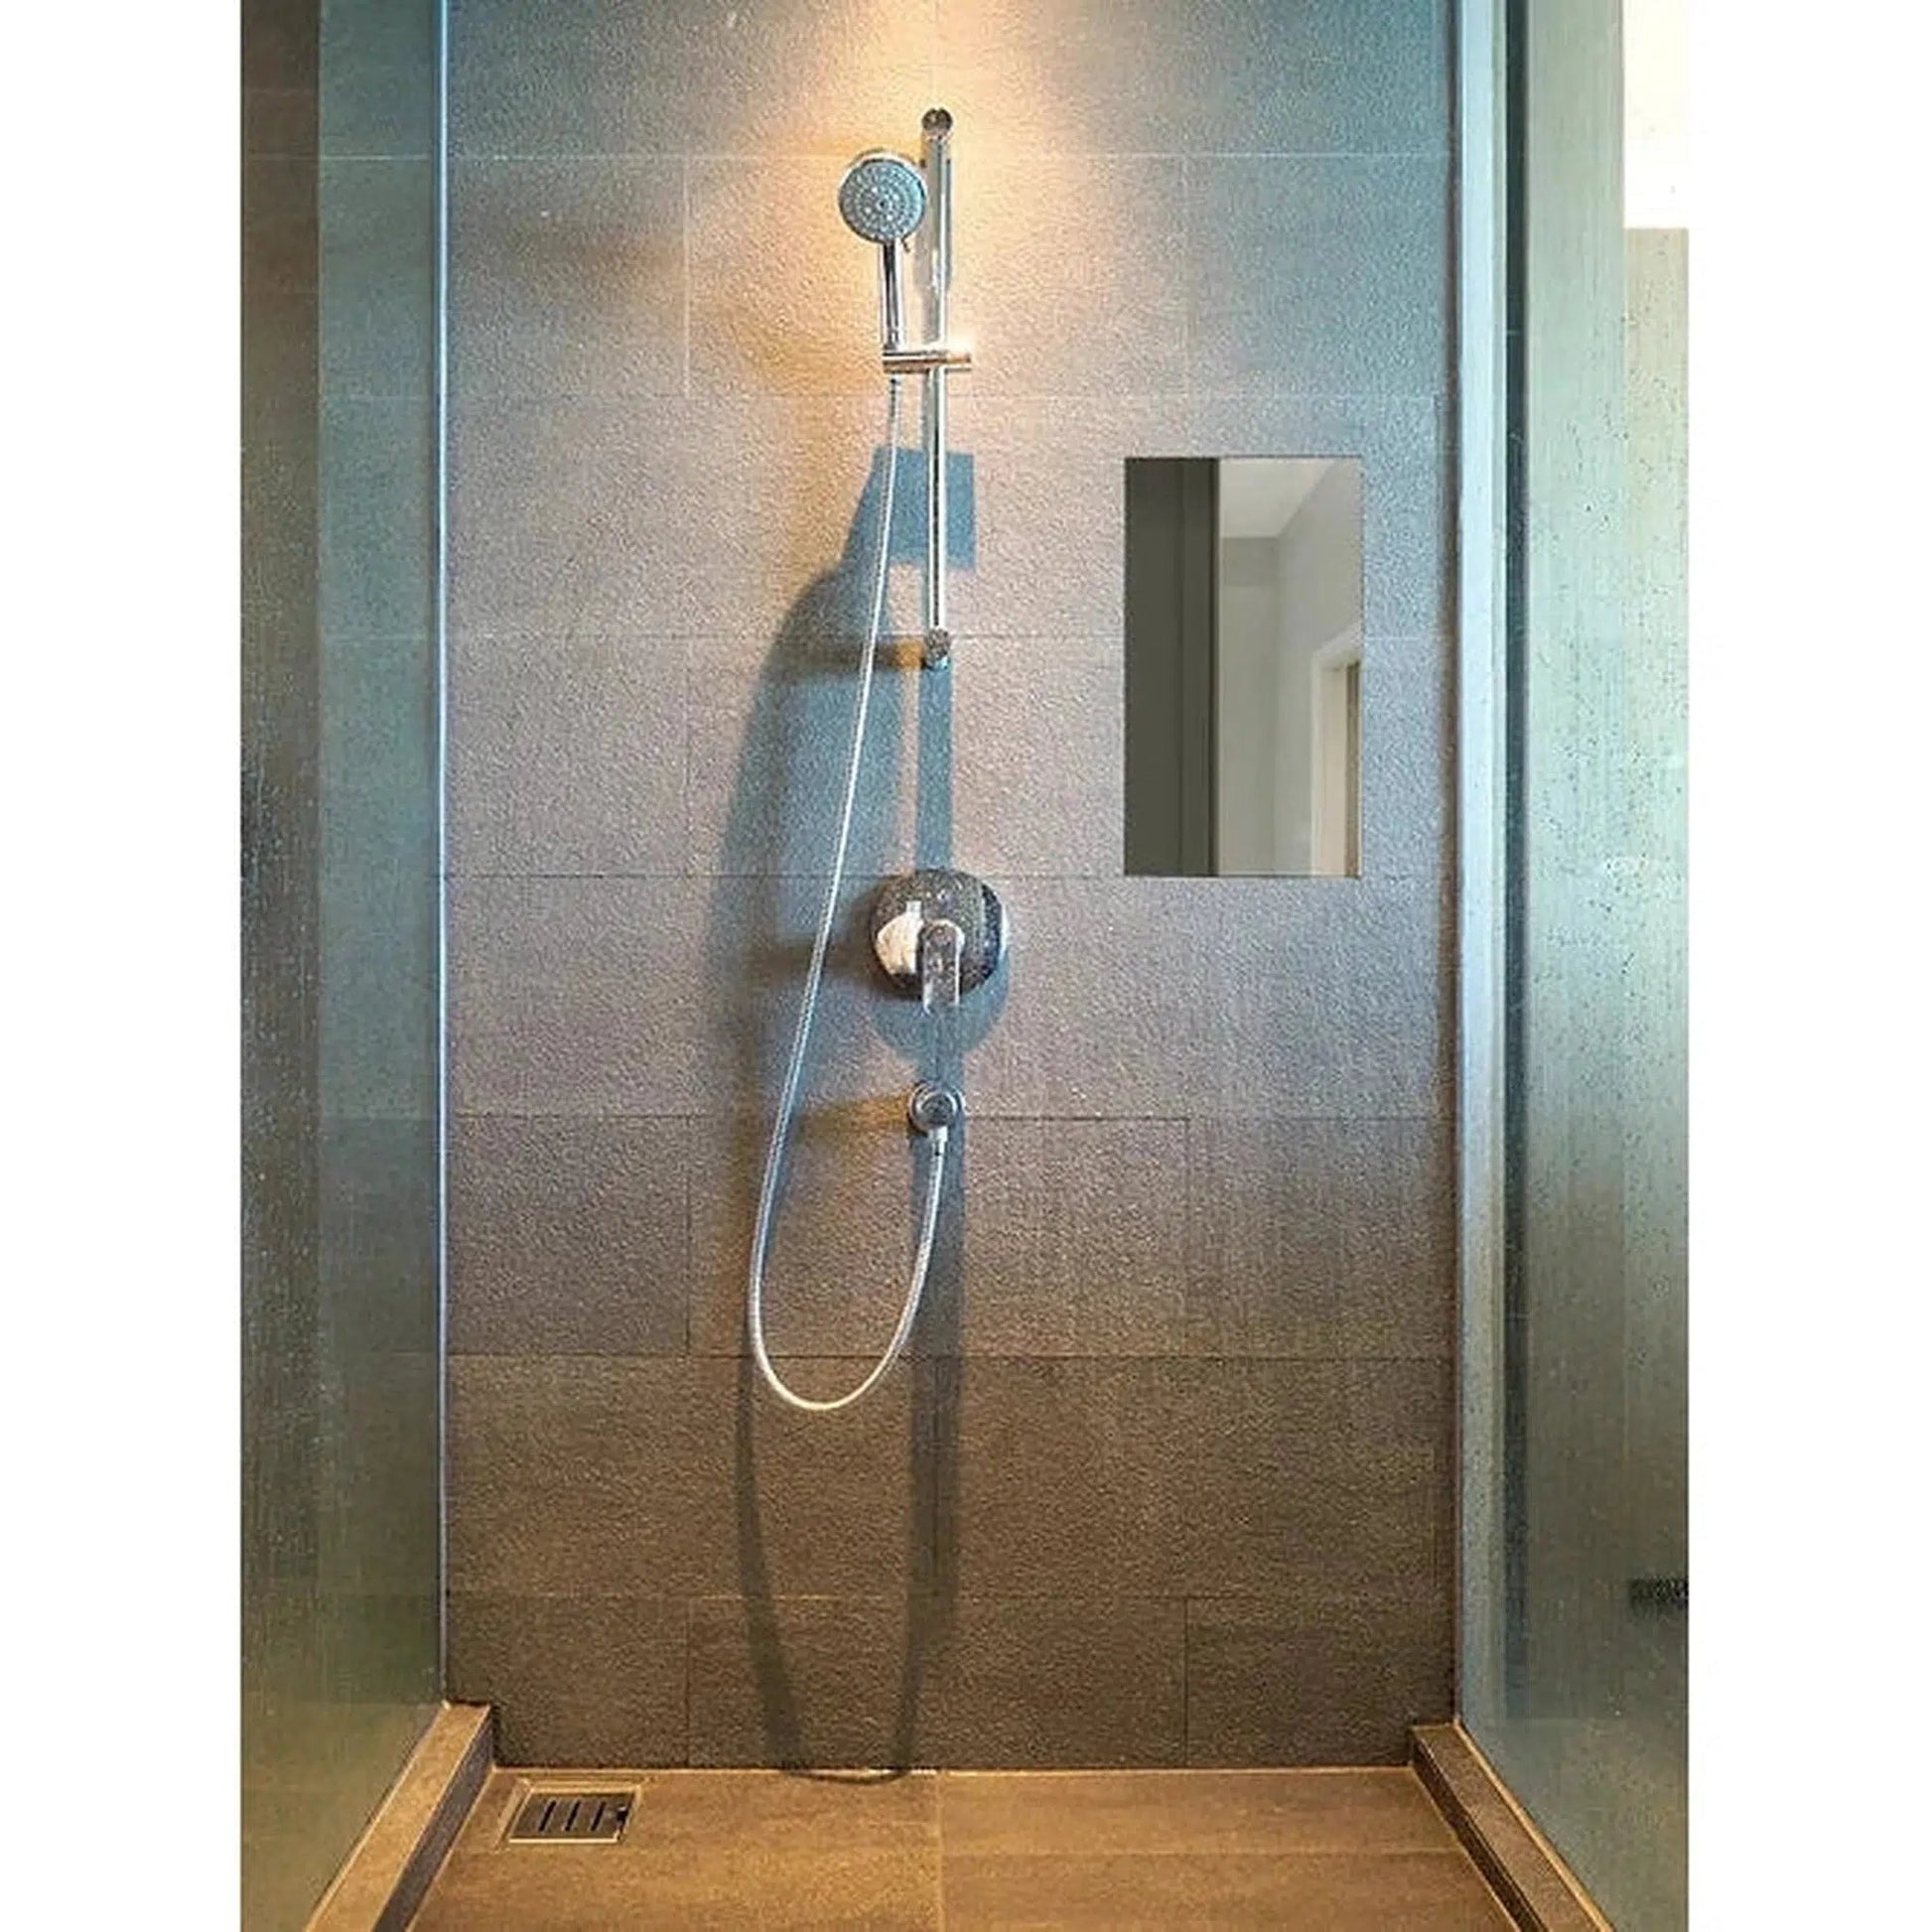 ClearMirror 12" x 12" Fog-Free Wall-Mounted Shower Mirror With Heating Pad